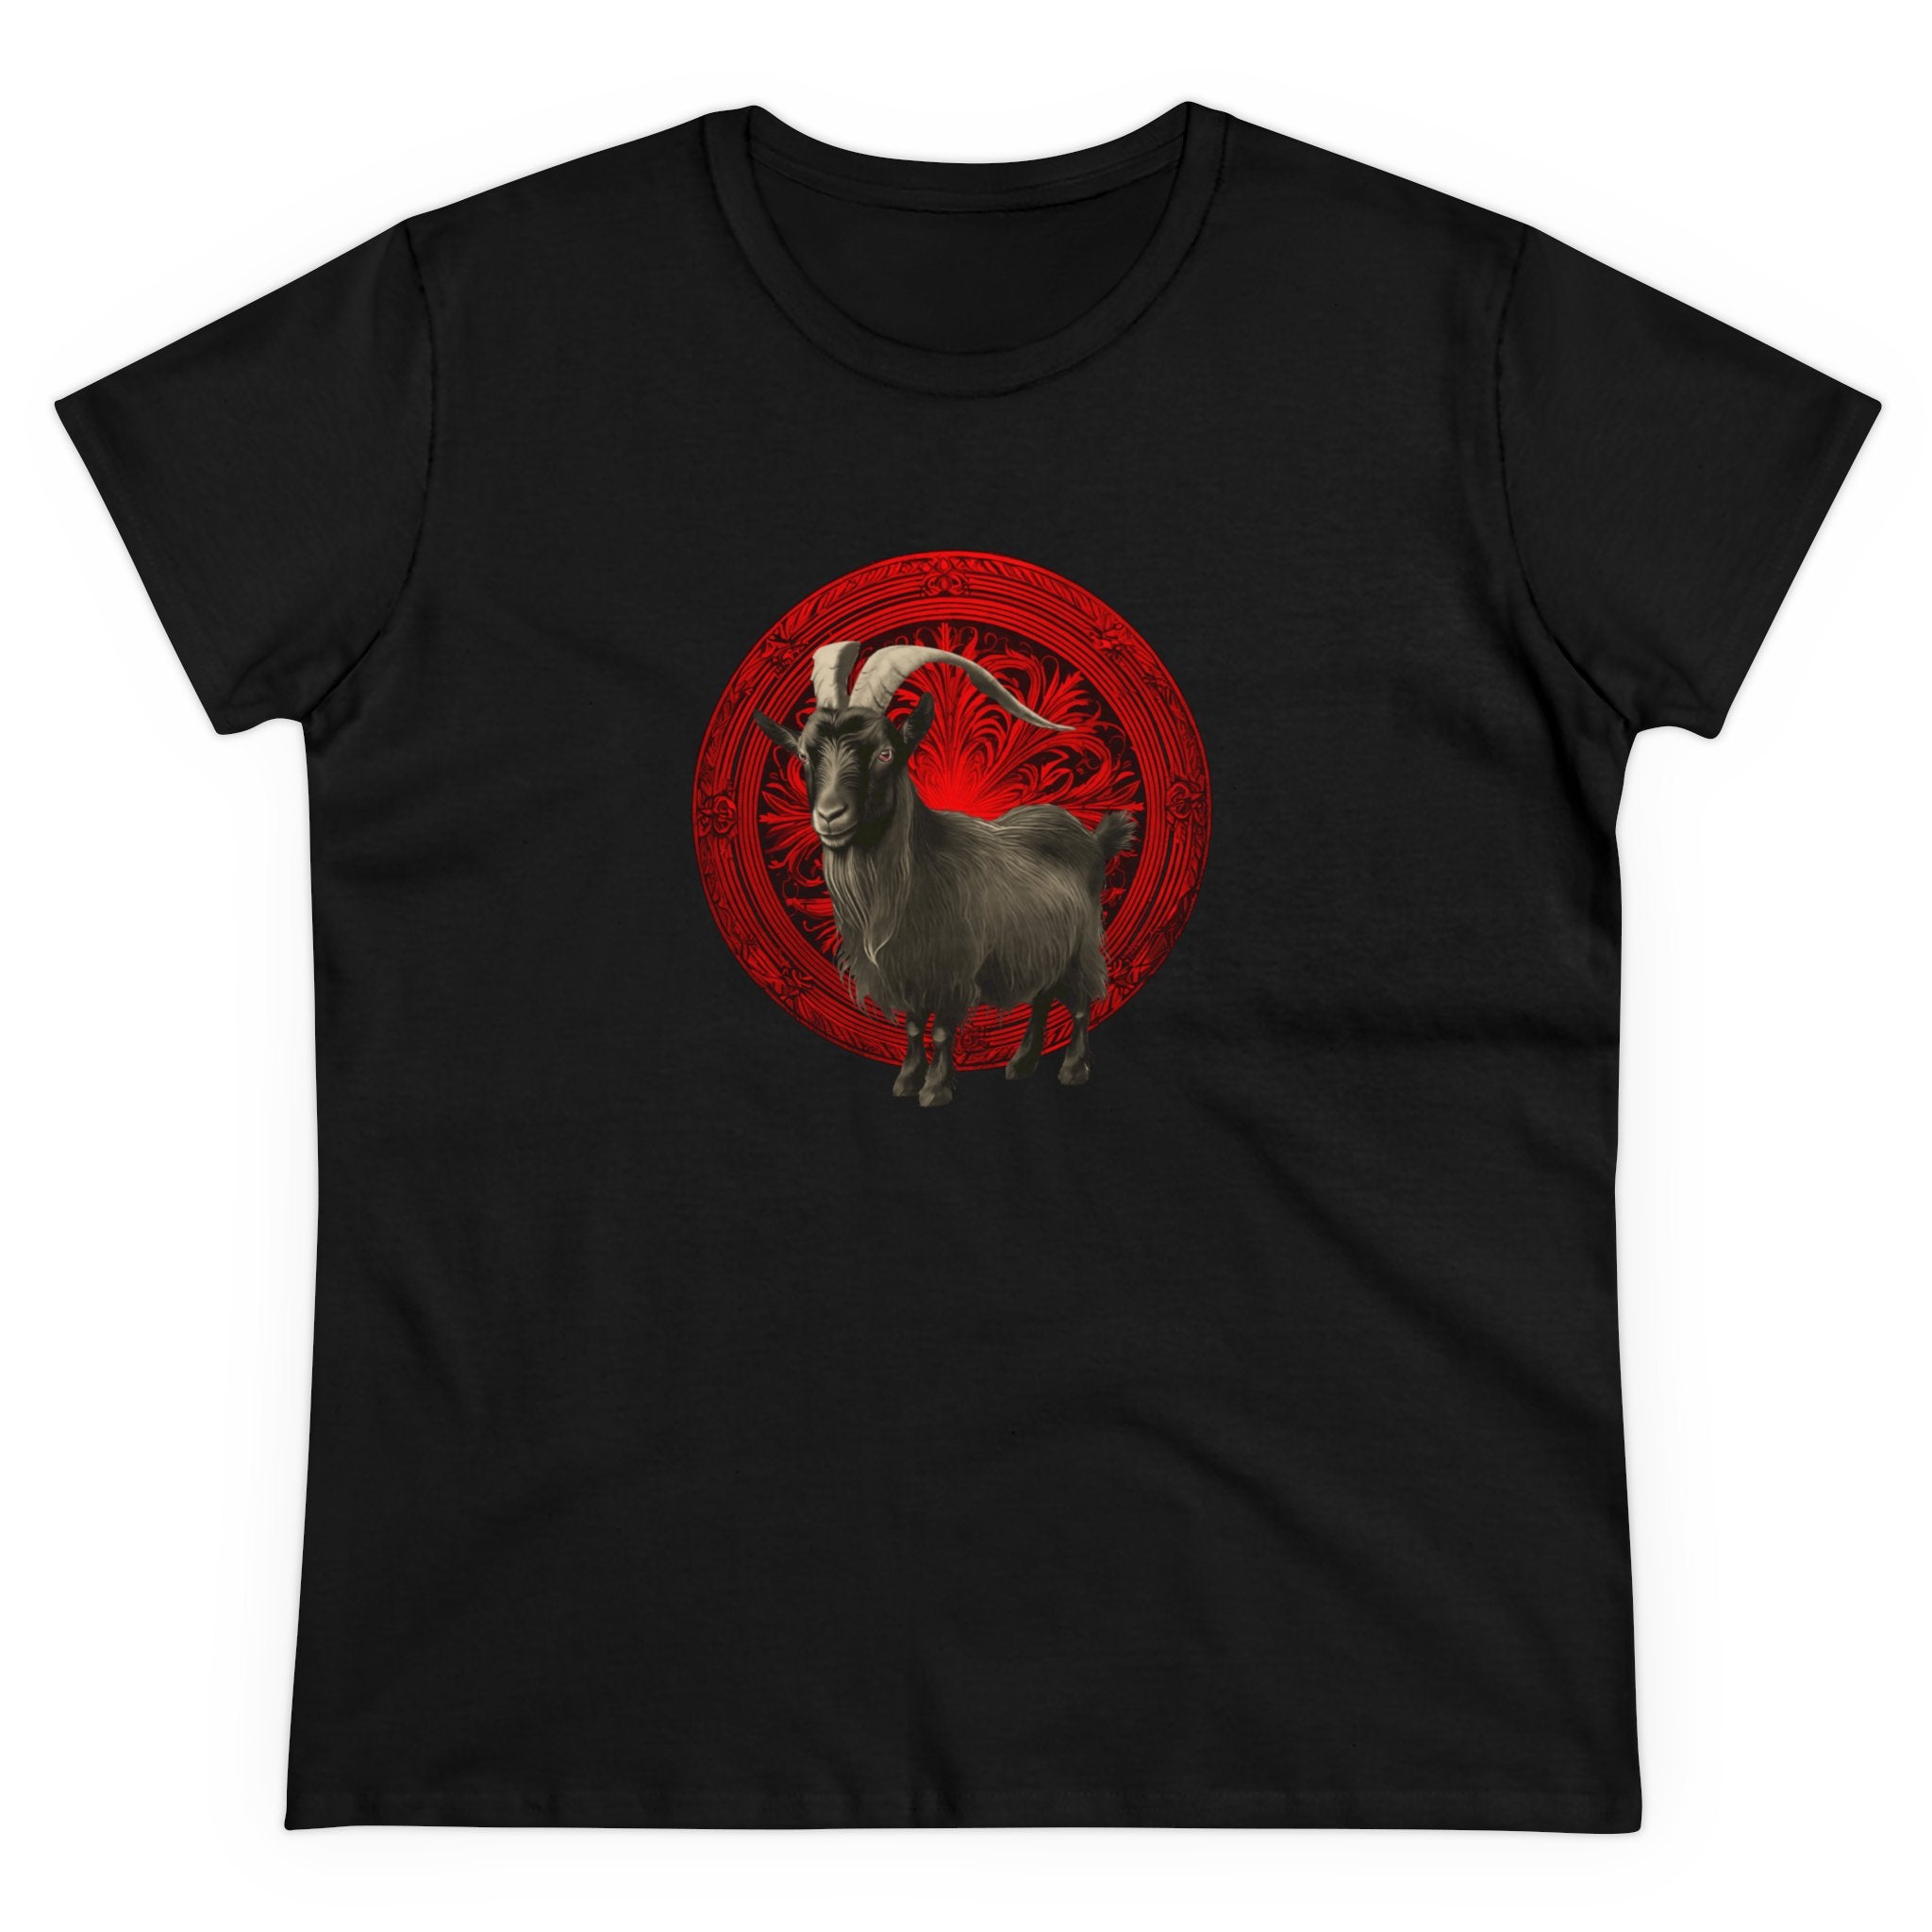 The Witch's Movie Coven "Movie Goat - Red" Women's Midweight Tee